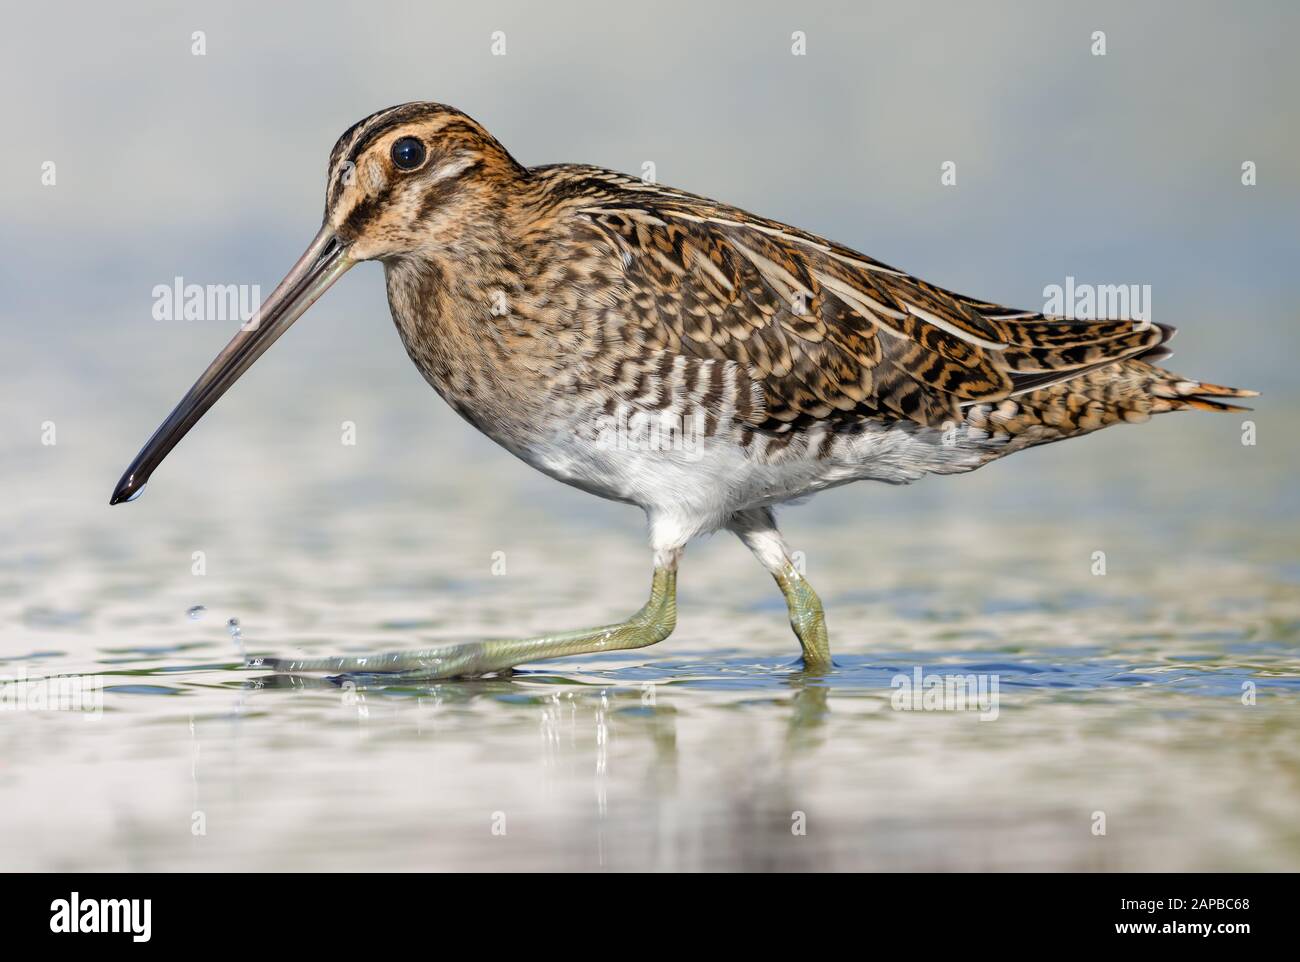 Tight shot of Common snipe walking on water shore border in bright sunny day Stock Photo